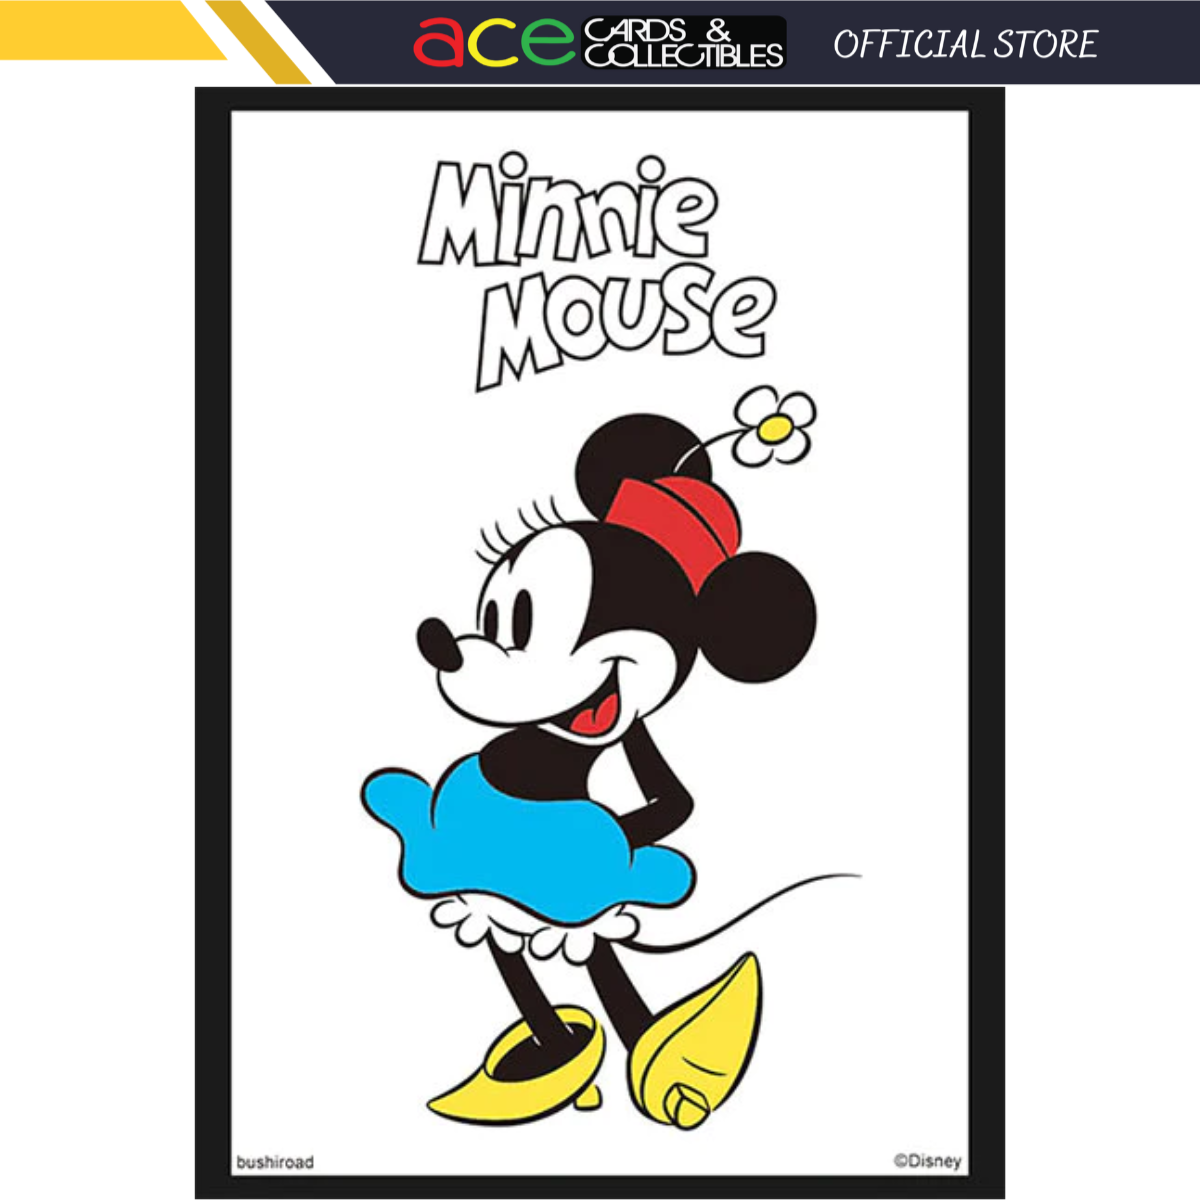 Bushiroad Sleeve Collection - Disney - "Minnie Mouse" (Vol.3678)-Bushiroad-Ace Cards & Collectibles